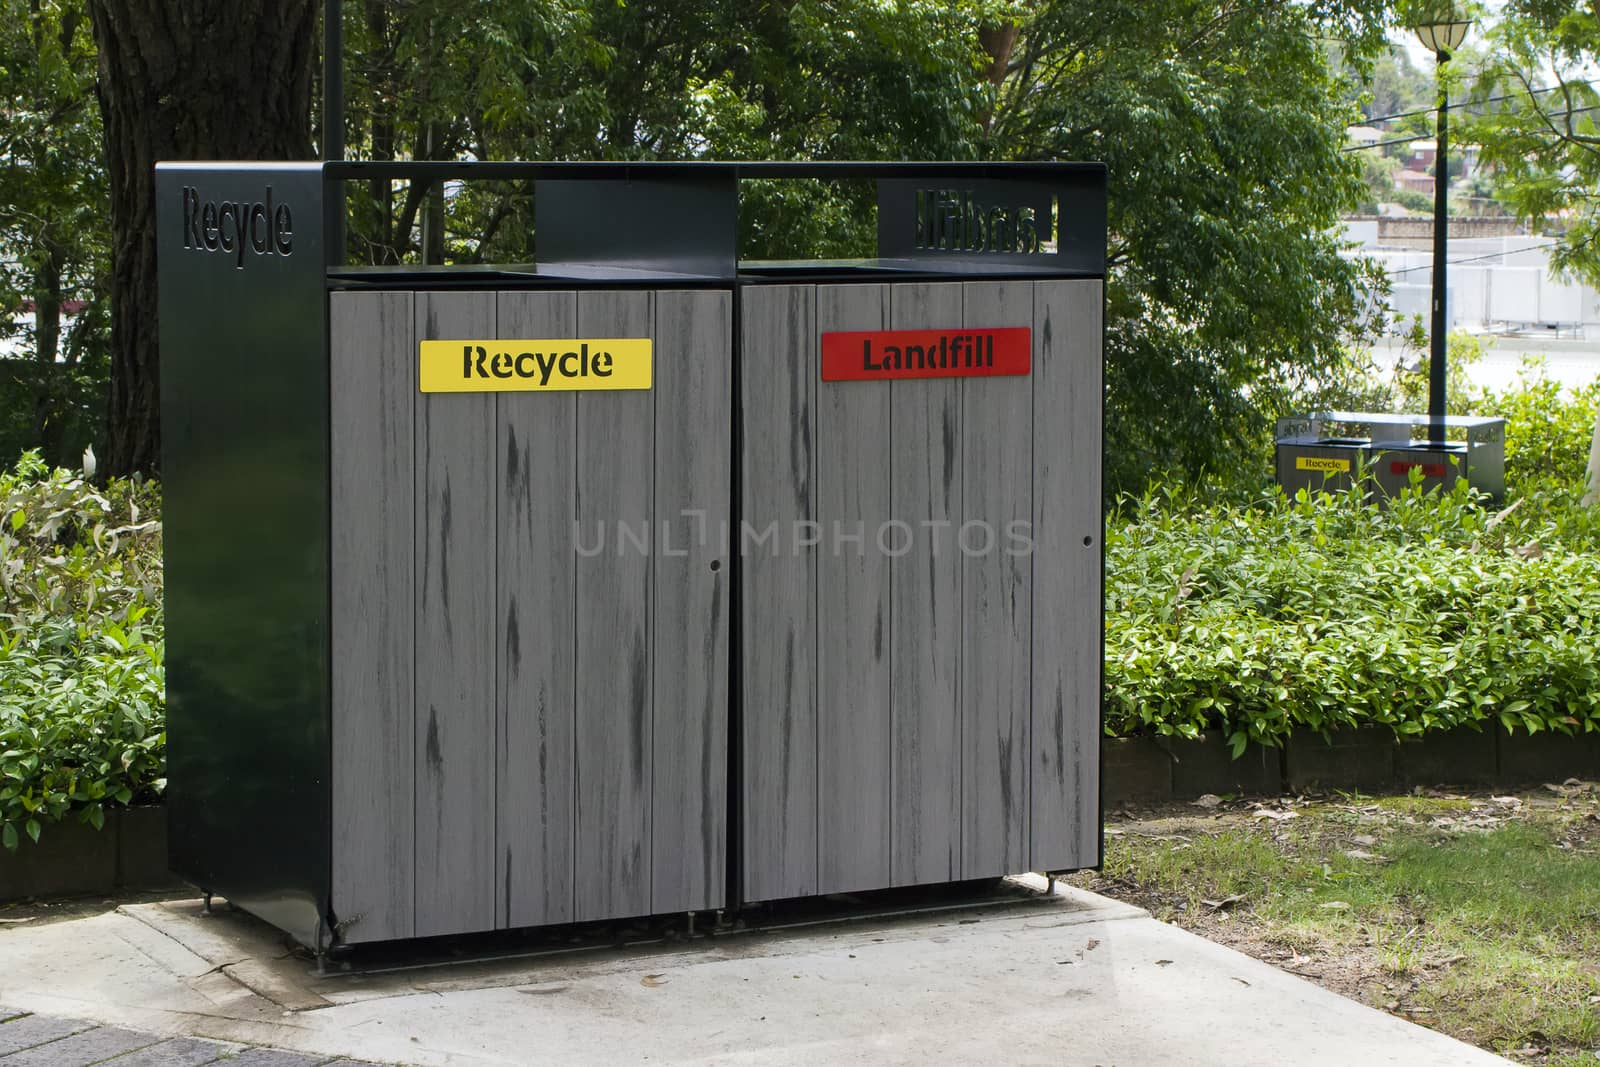 Enclosure for recycling waste and landfill bins in a public park